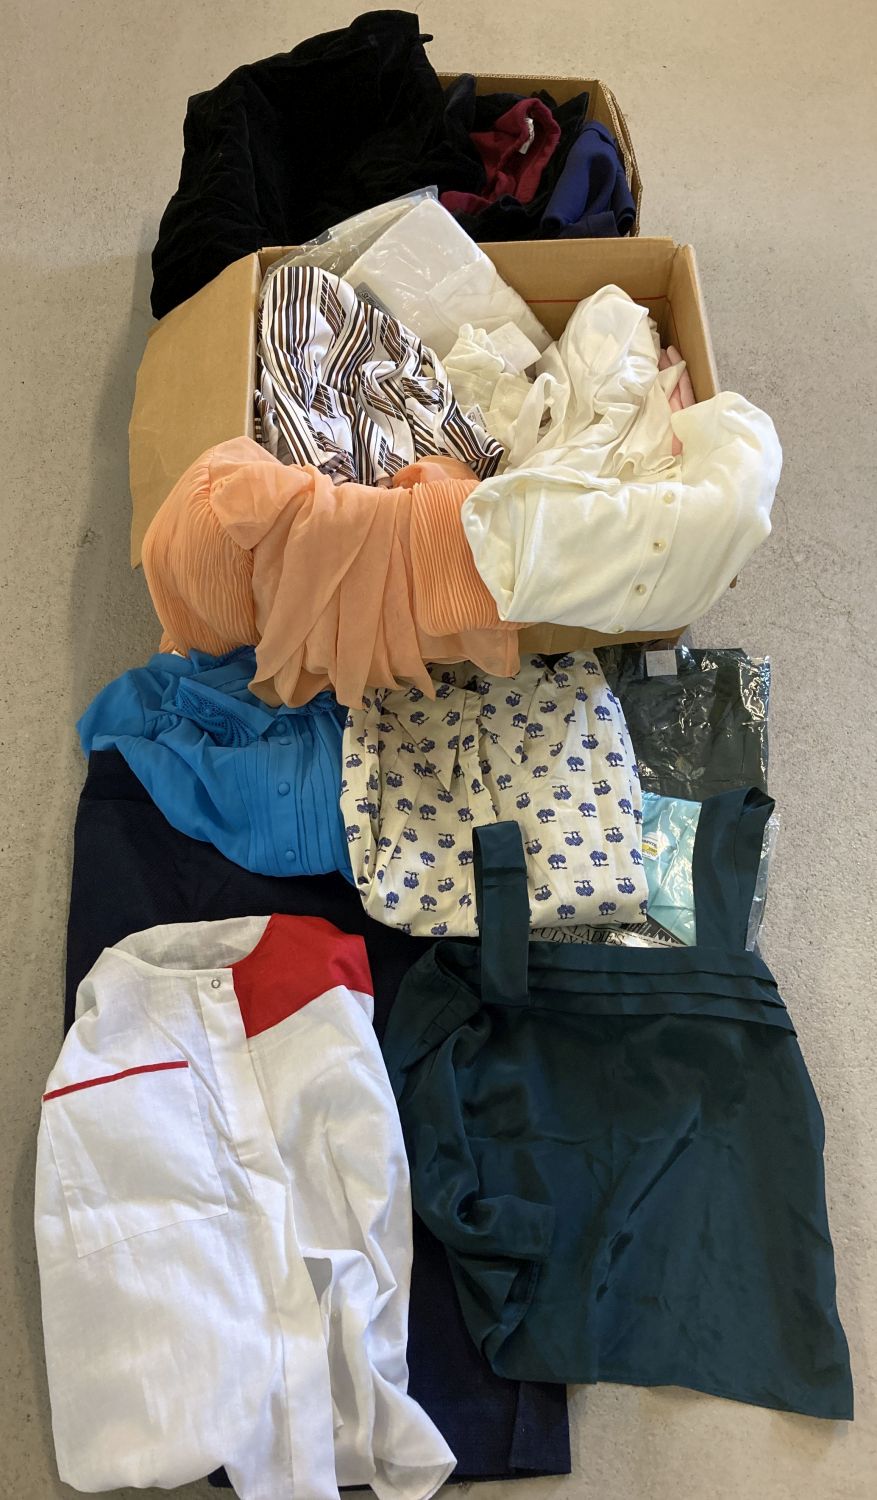 2 boxes of vintage clothes, some in original packaging.